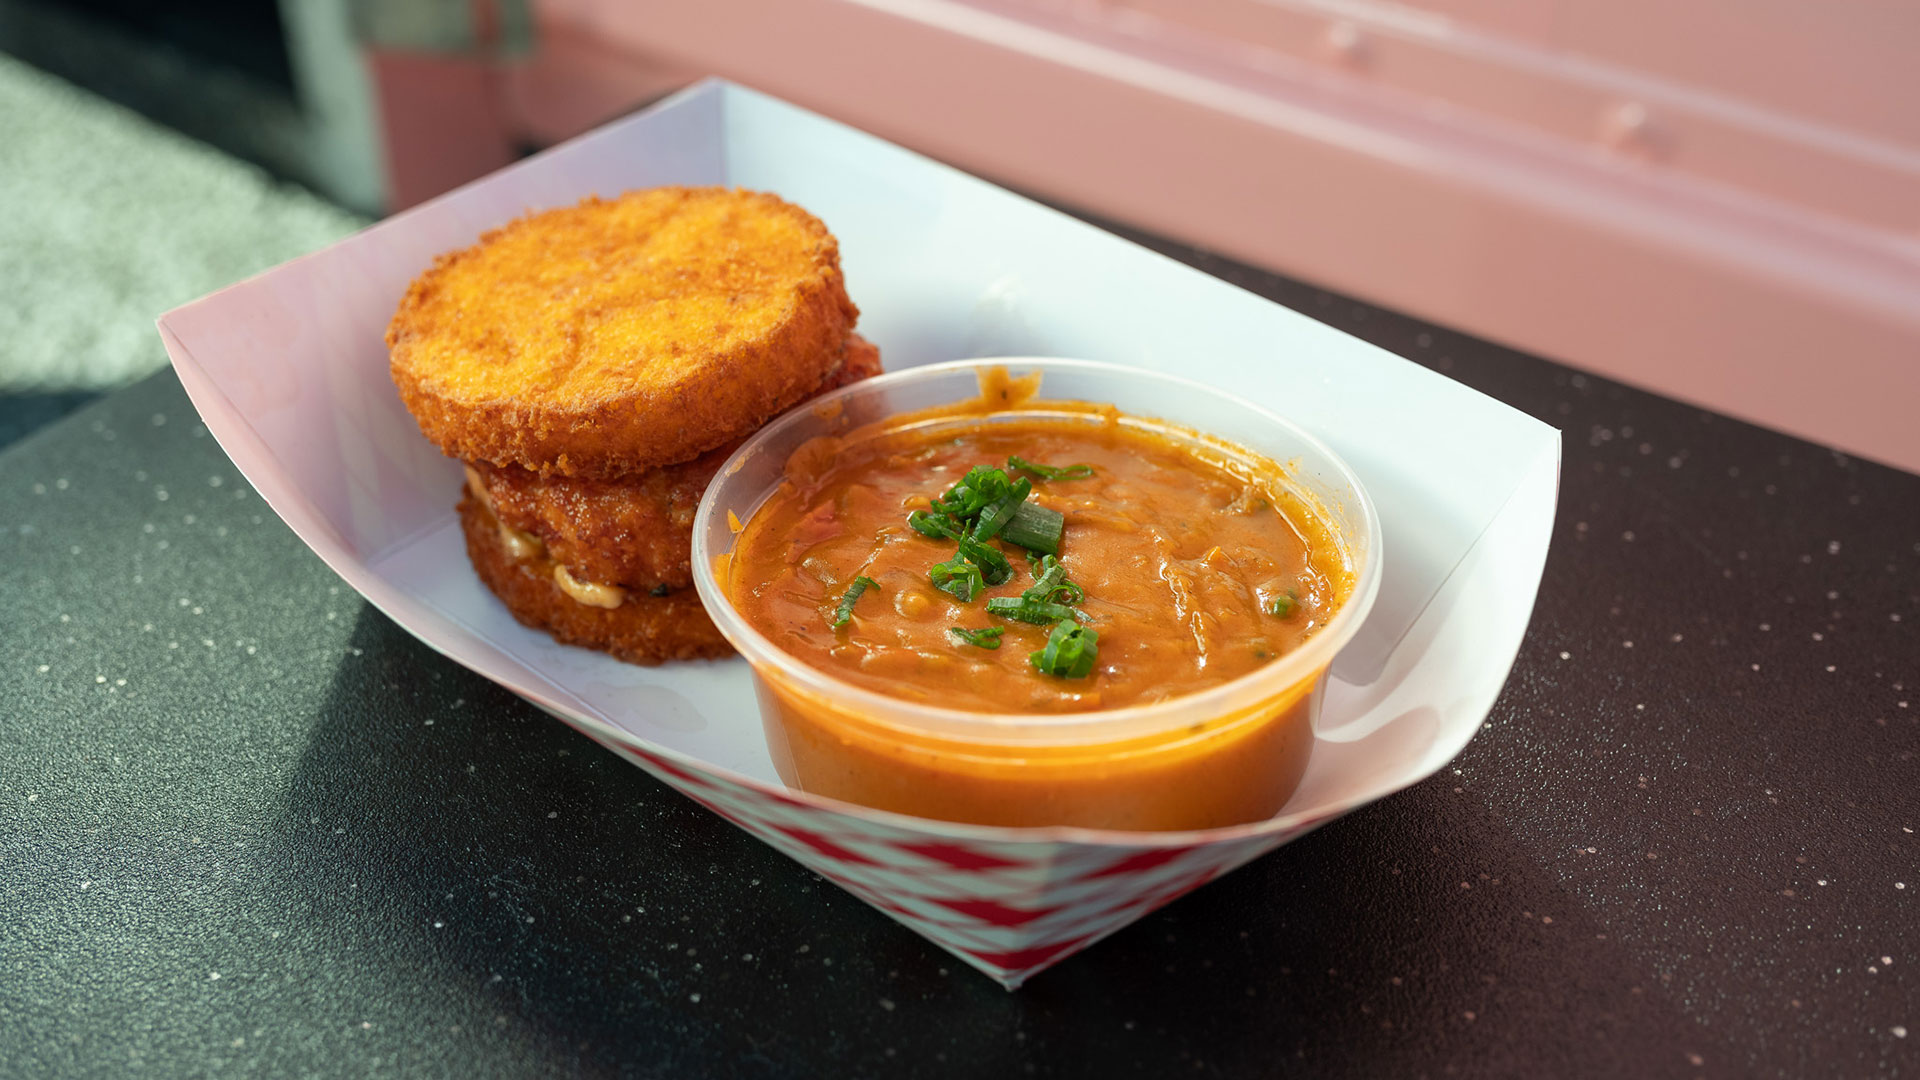 closeup of a clear plastic cup of reddish-orange gumbo, with a shrimp and grits burger on the side